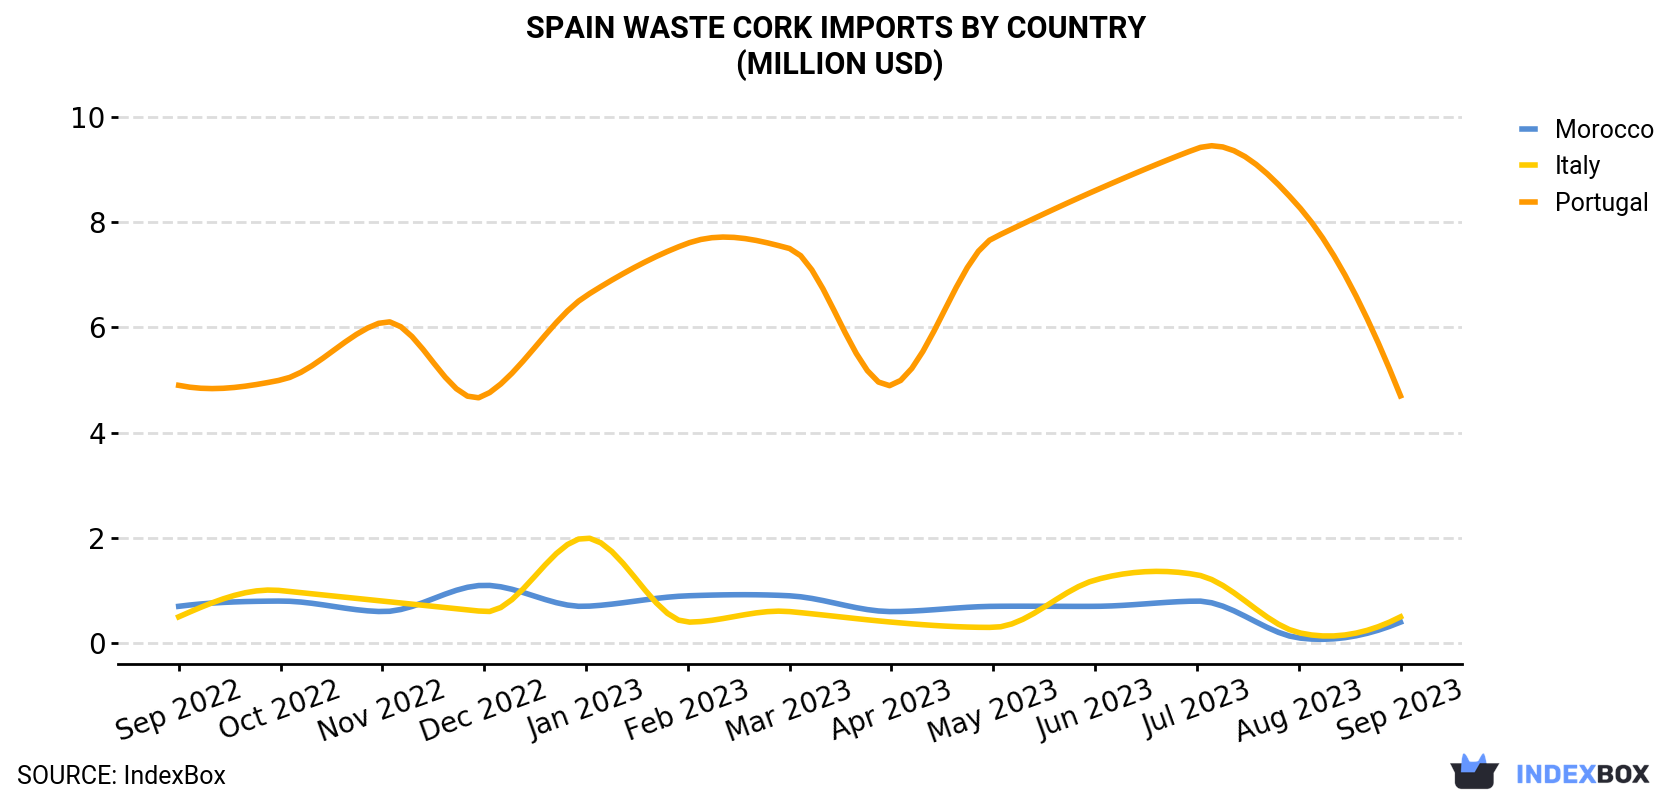 Spain Waste Cork Imports By Country (Million USD)